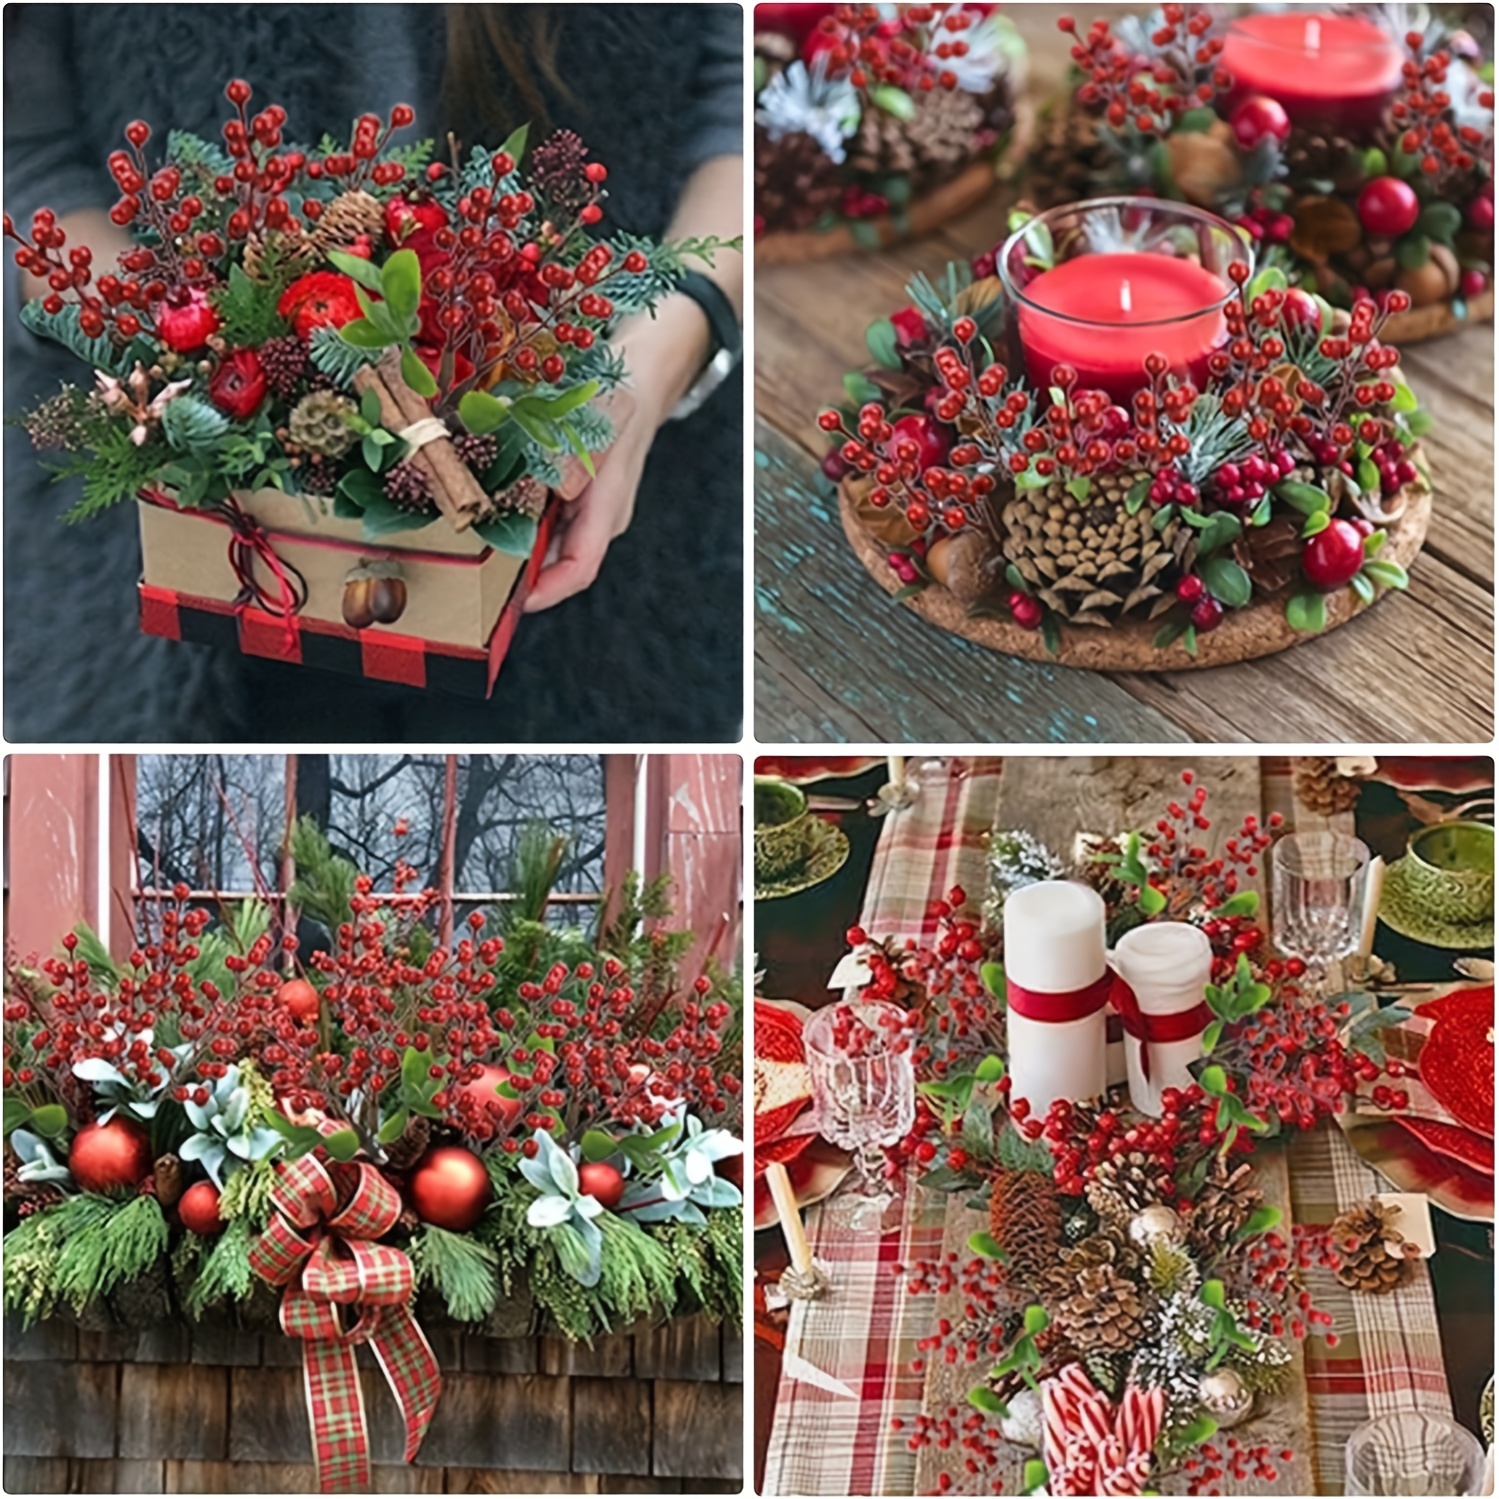 5 Pack Artificial Christmas Picks Ornaments - Artificial Floral Picks with Berry and Leaves for DIY Christmas Wreath, Crafts, Holiday and Home Decor 